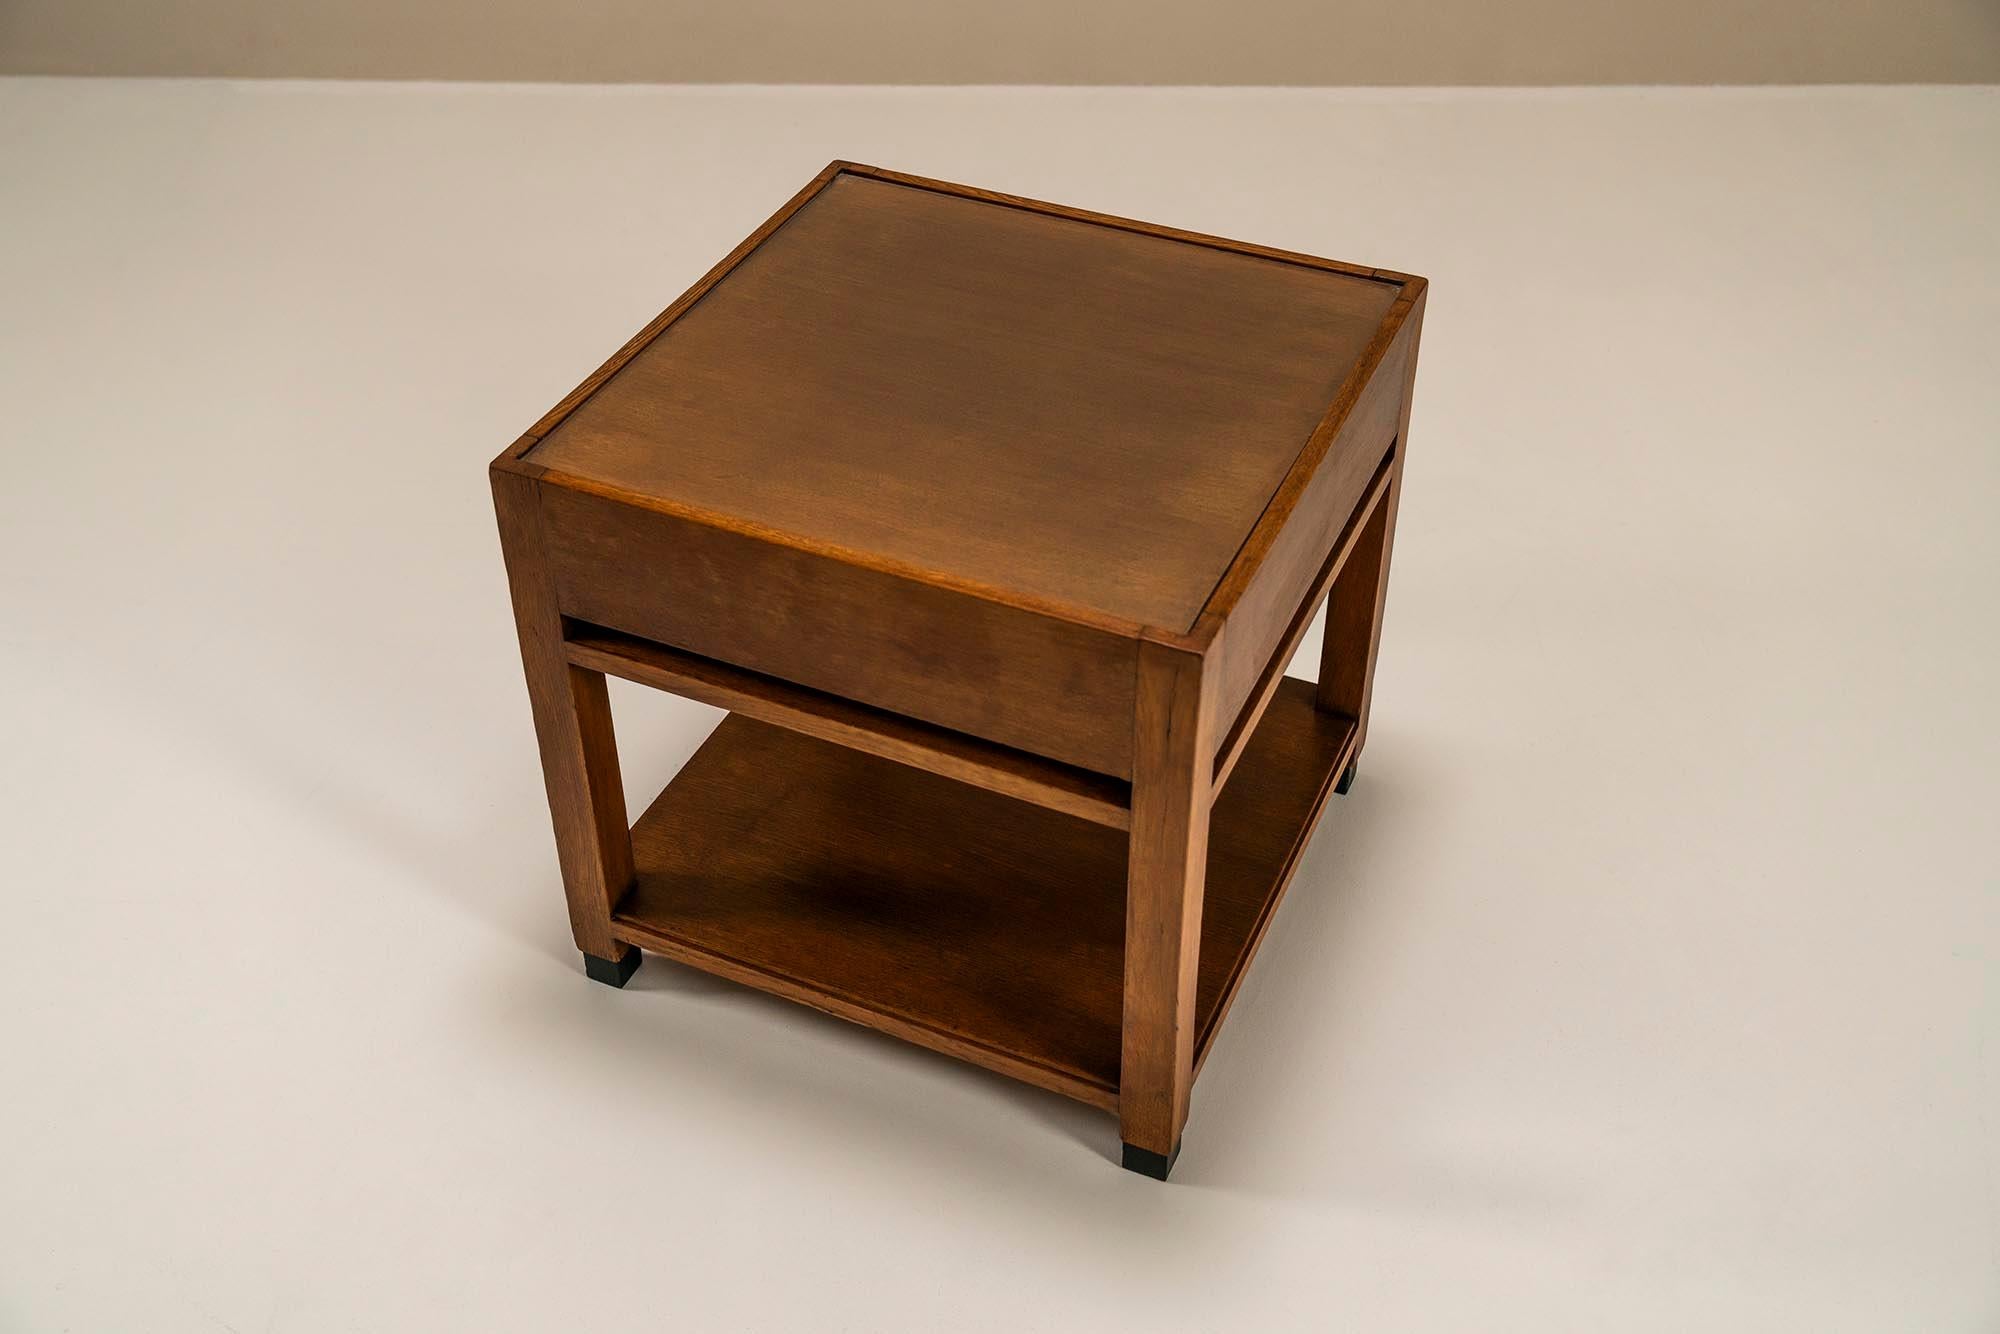 Amsterdam School The Hague School Square Coffee Table In Oak, The Netherlands 1930s For Sale